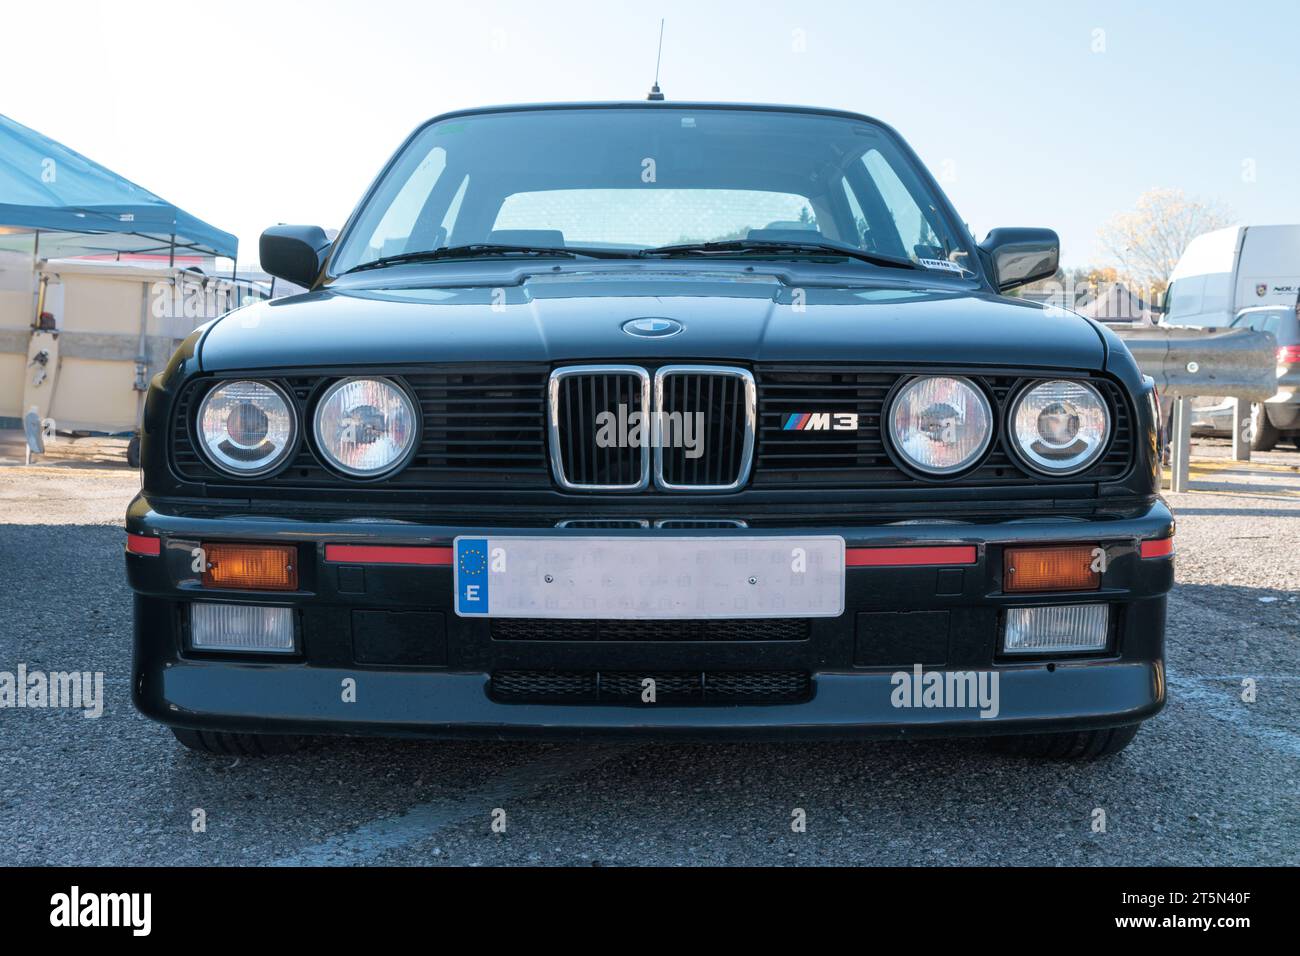 BMW M3 (E30), second generation of BMW 3 Series, front view Stock Photo